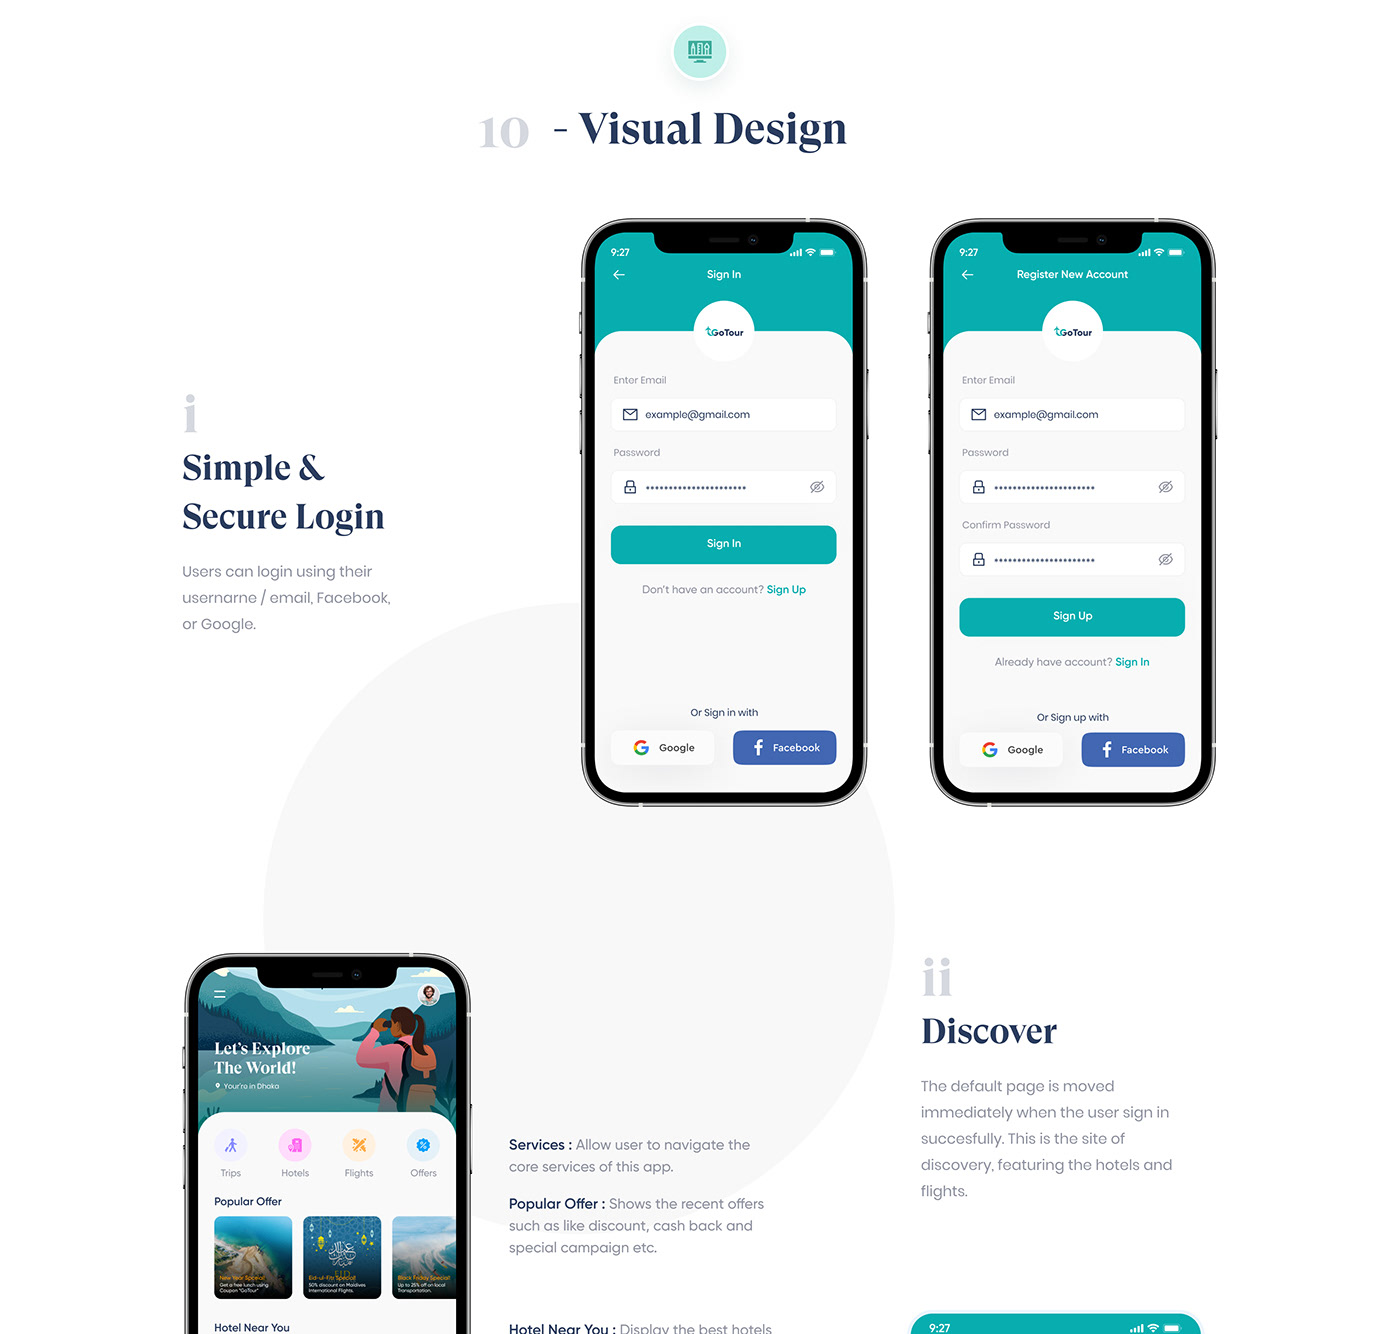 Case Study Flight Booking hotel booking tour app Travel App travel app case study travel booking UI Case study UX Case Study UX Research